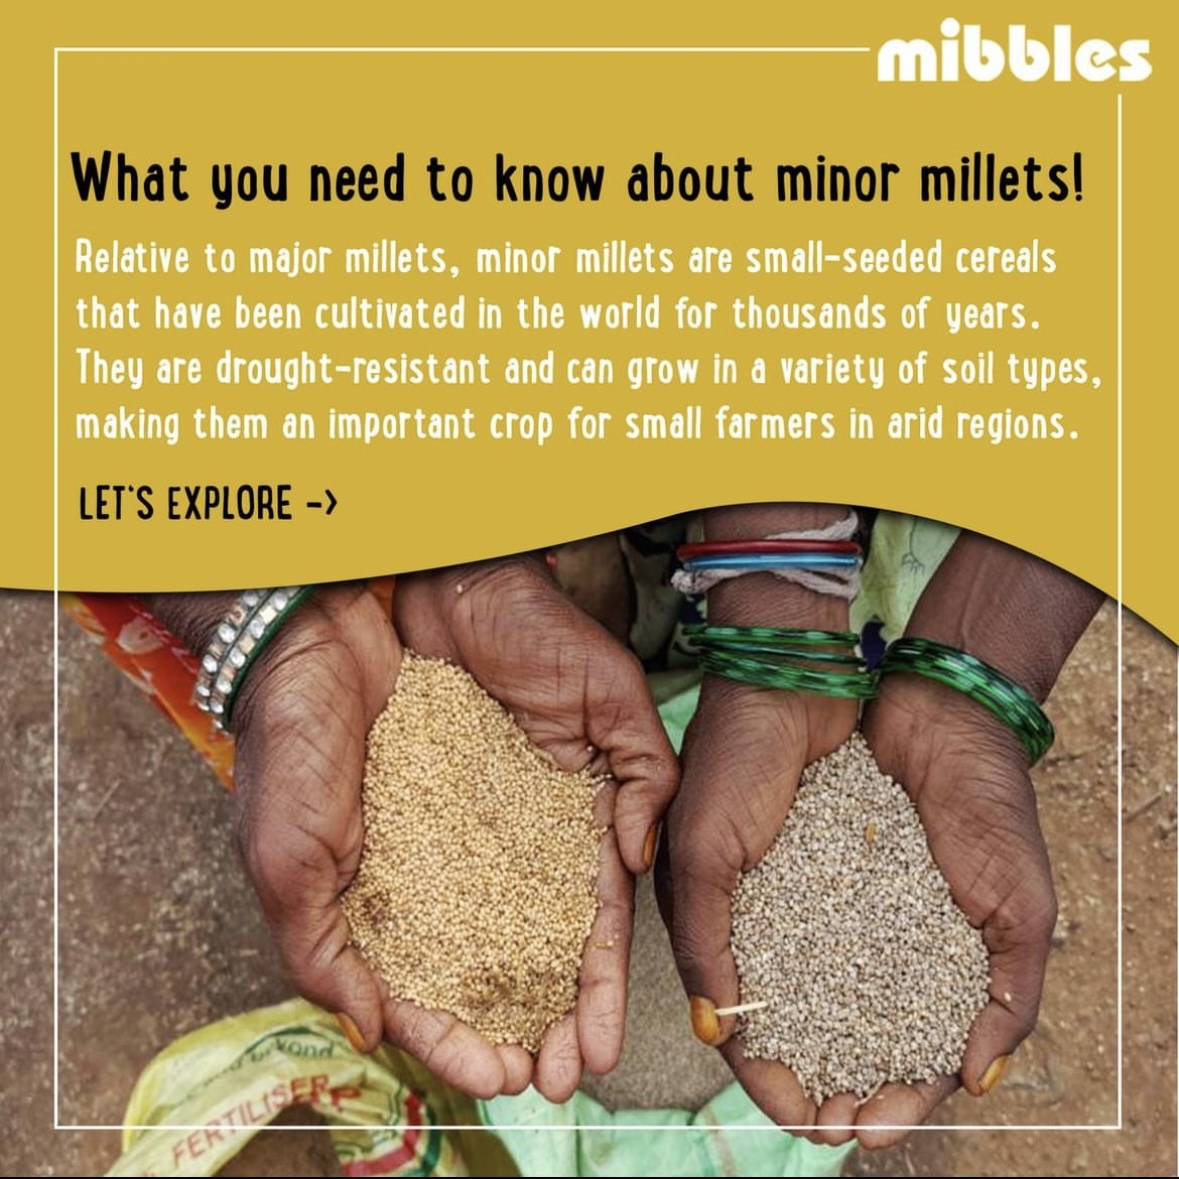 What you need to know about minor millets!